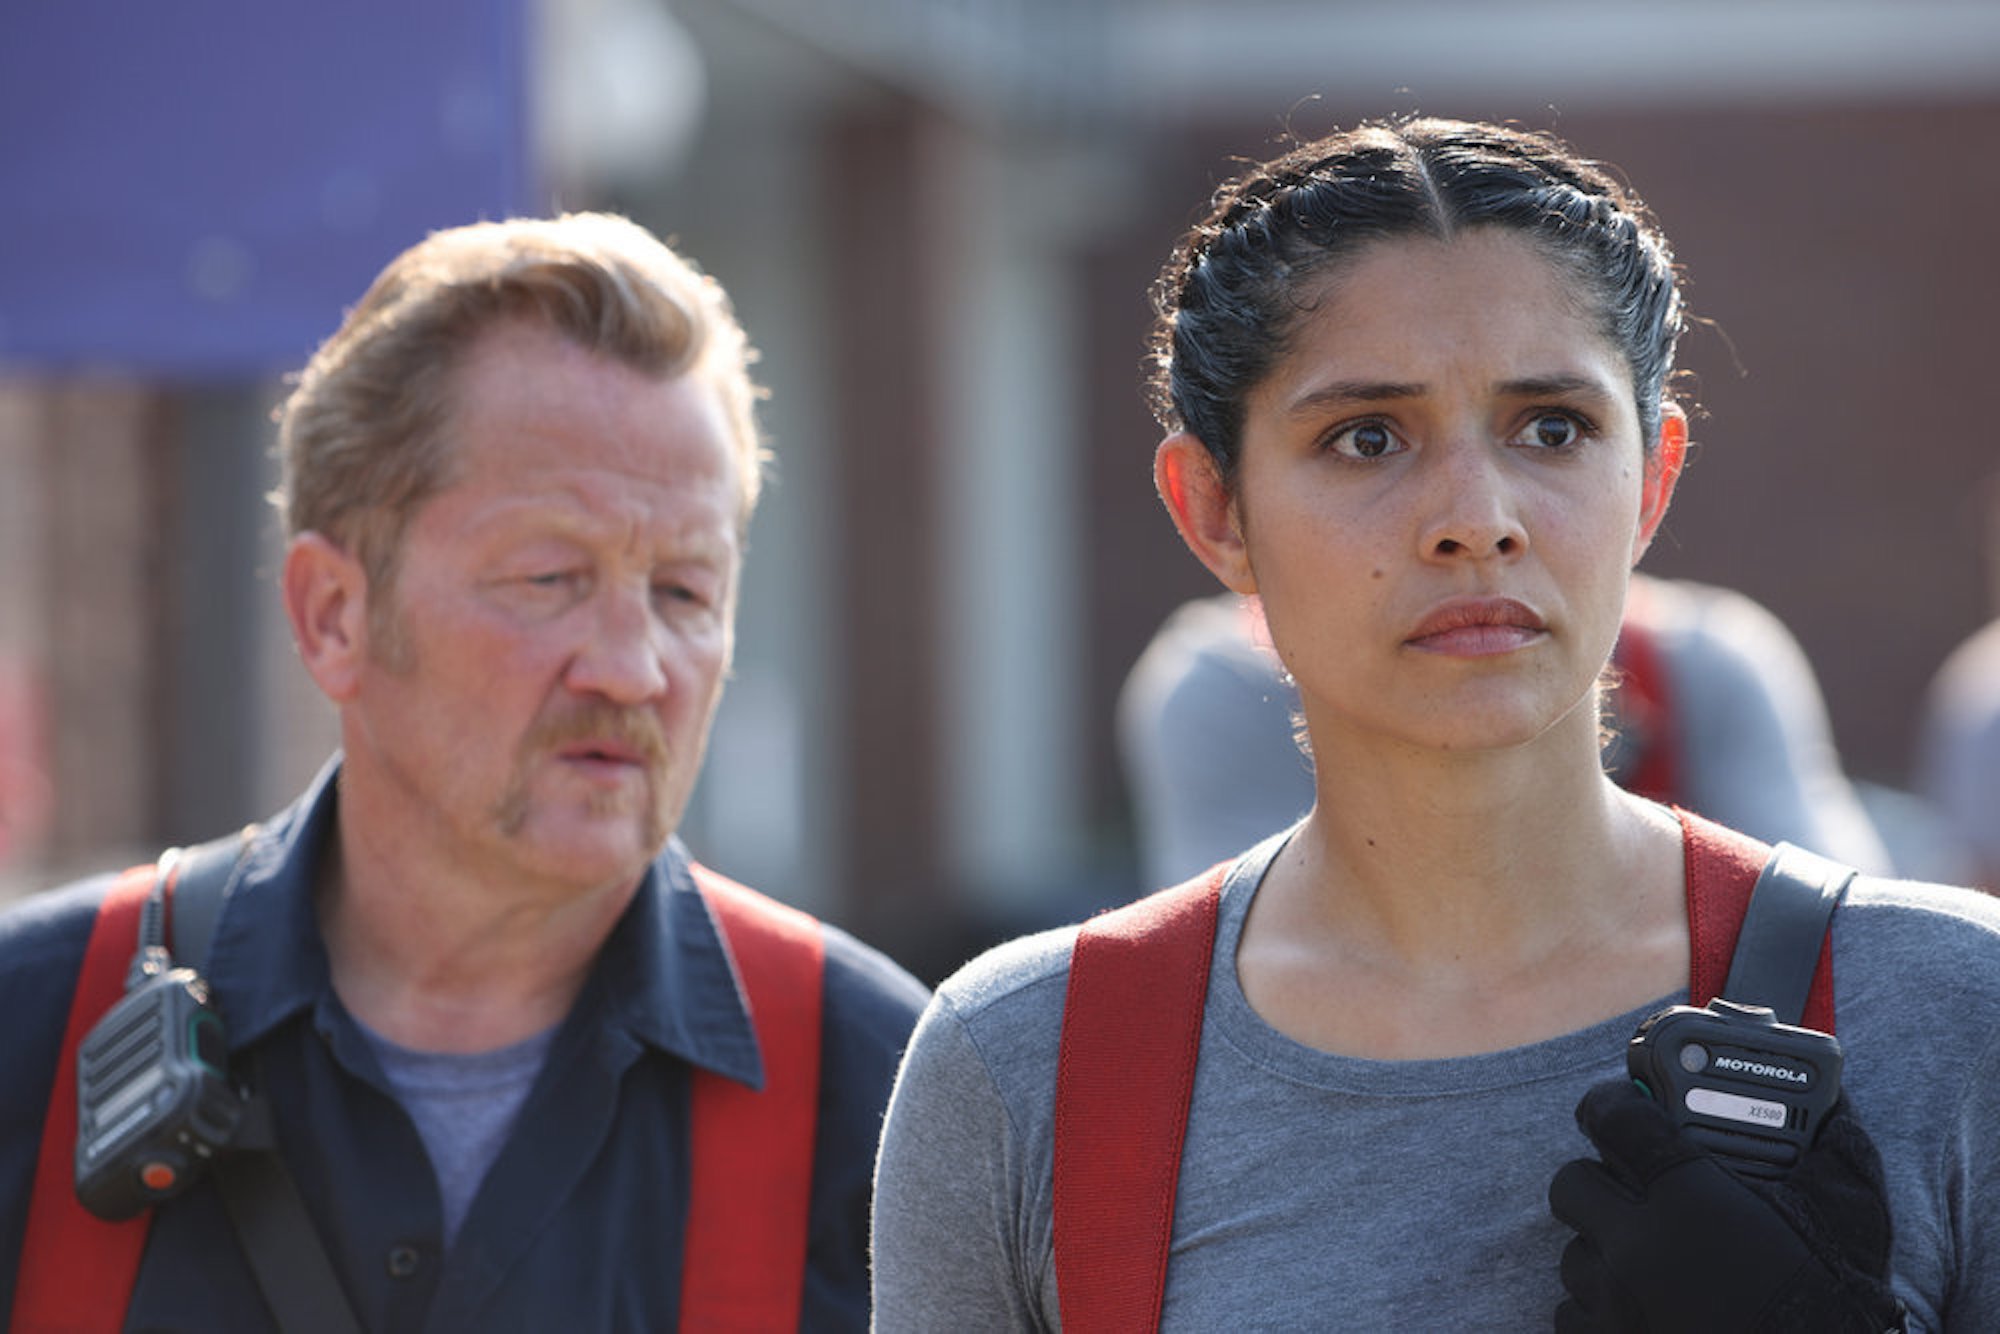 Randall 'Mouch' McHolland and Stella Kidd in 'Chicago Fire' Season 10